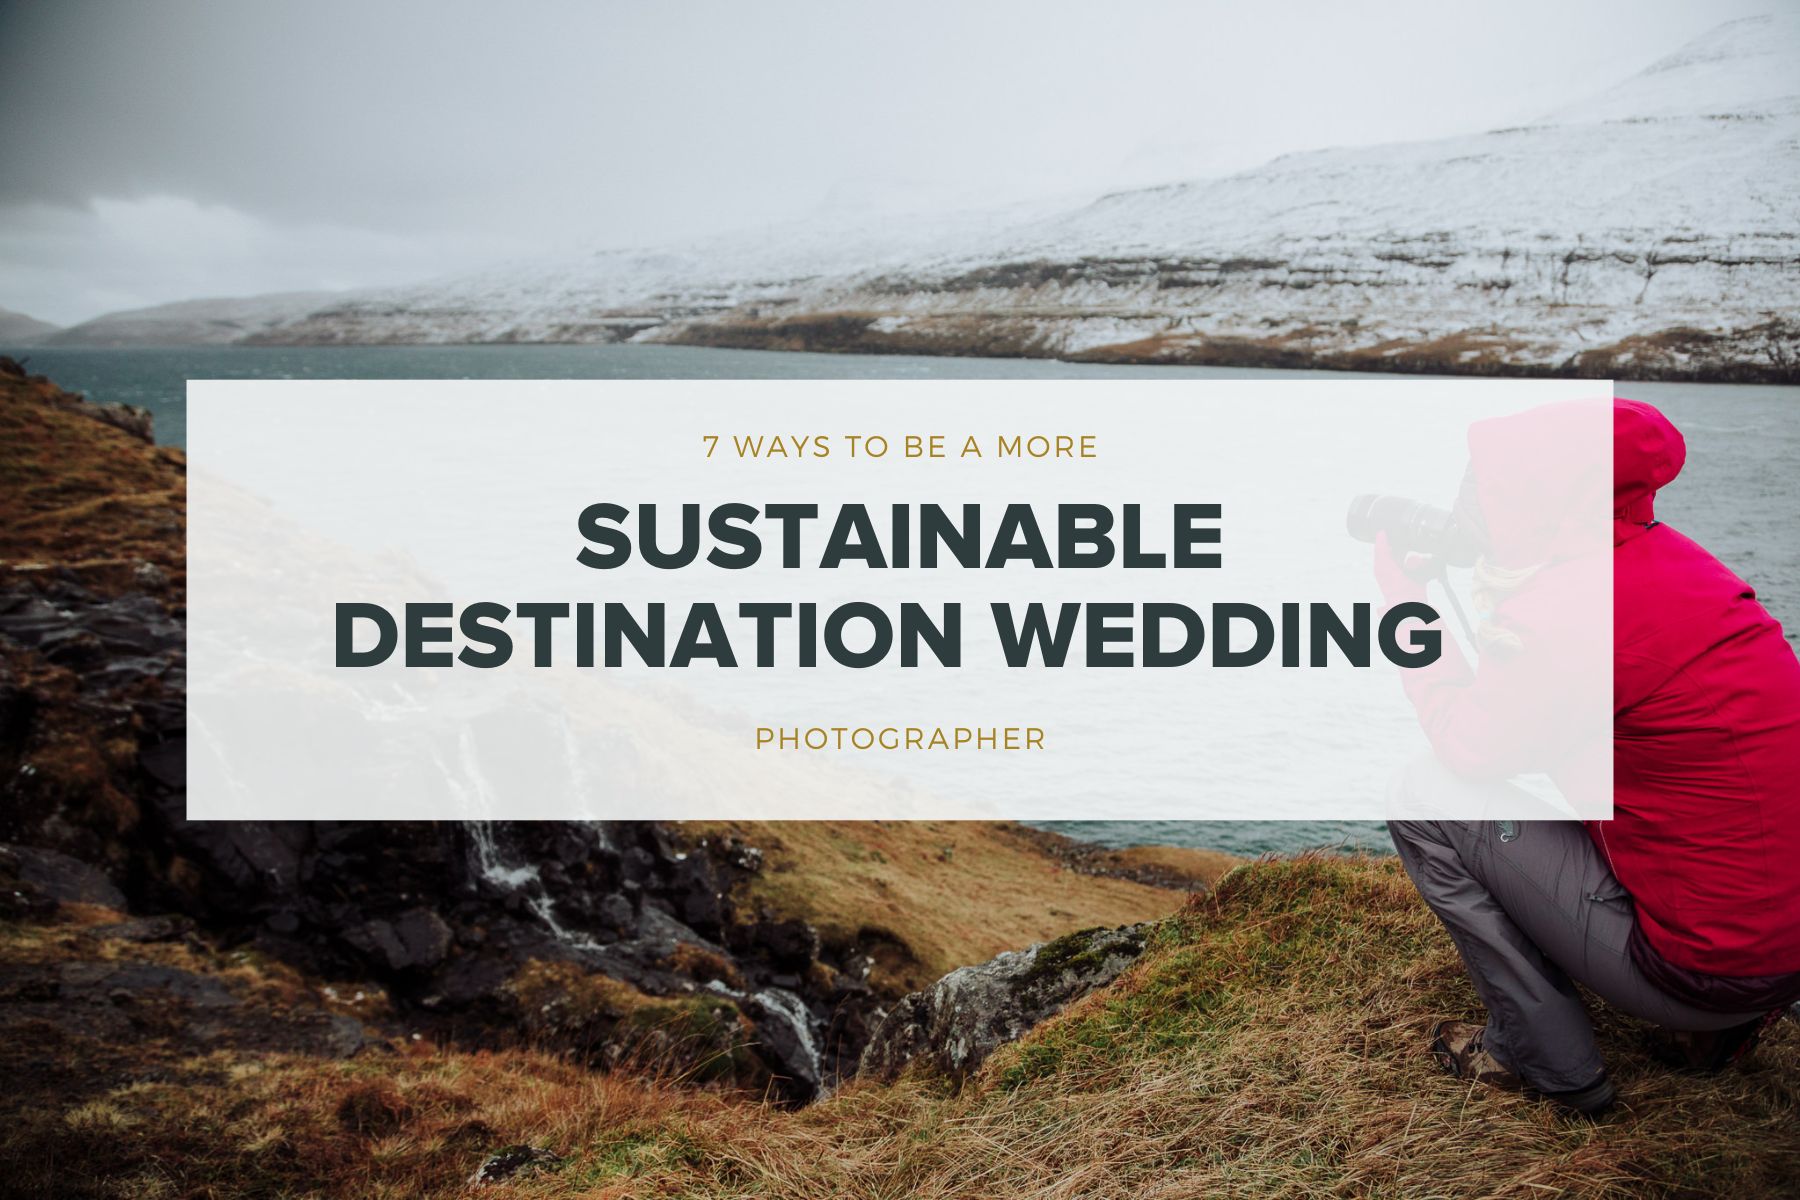 7 ways to be a more sustainable destination wedding photographer